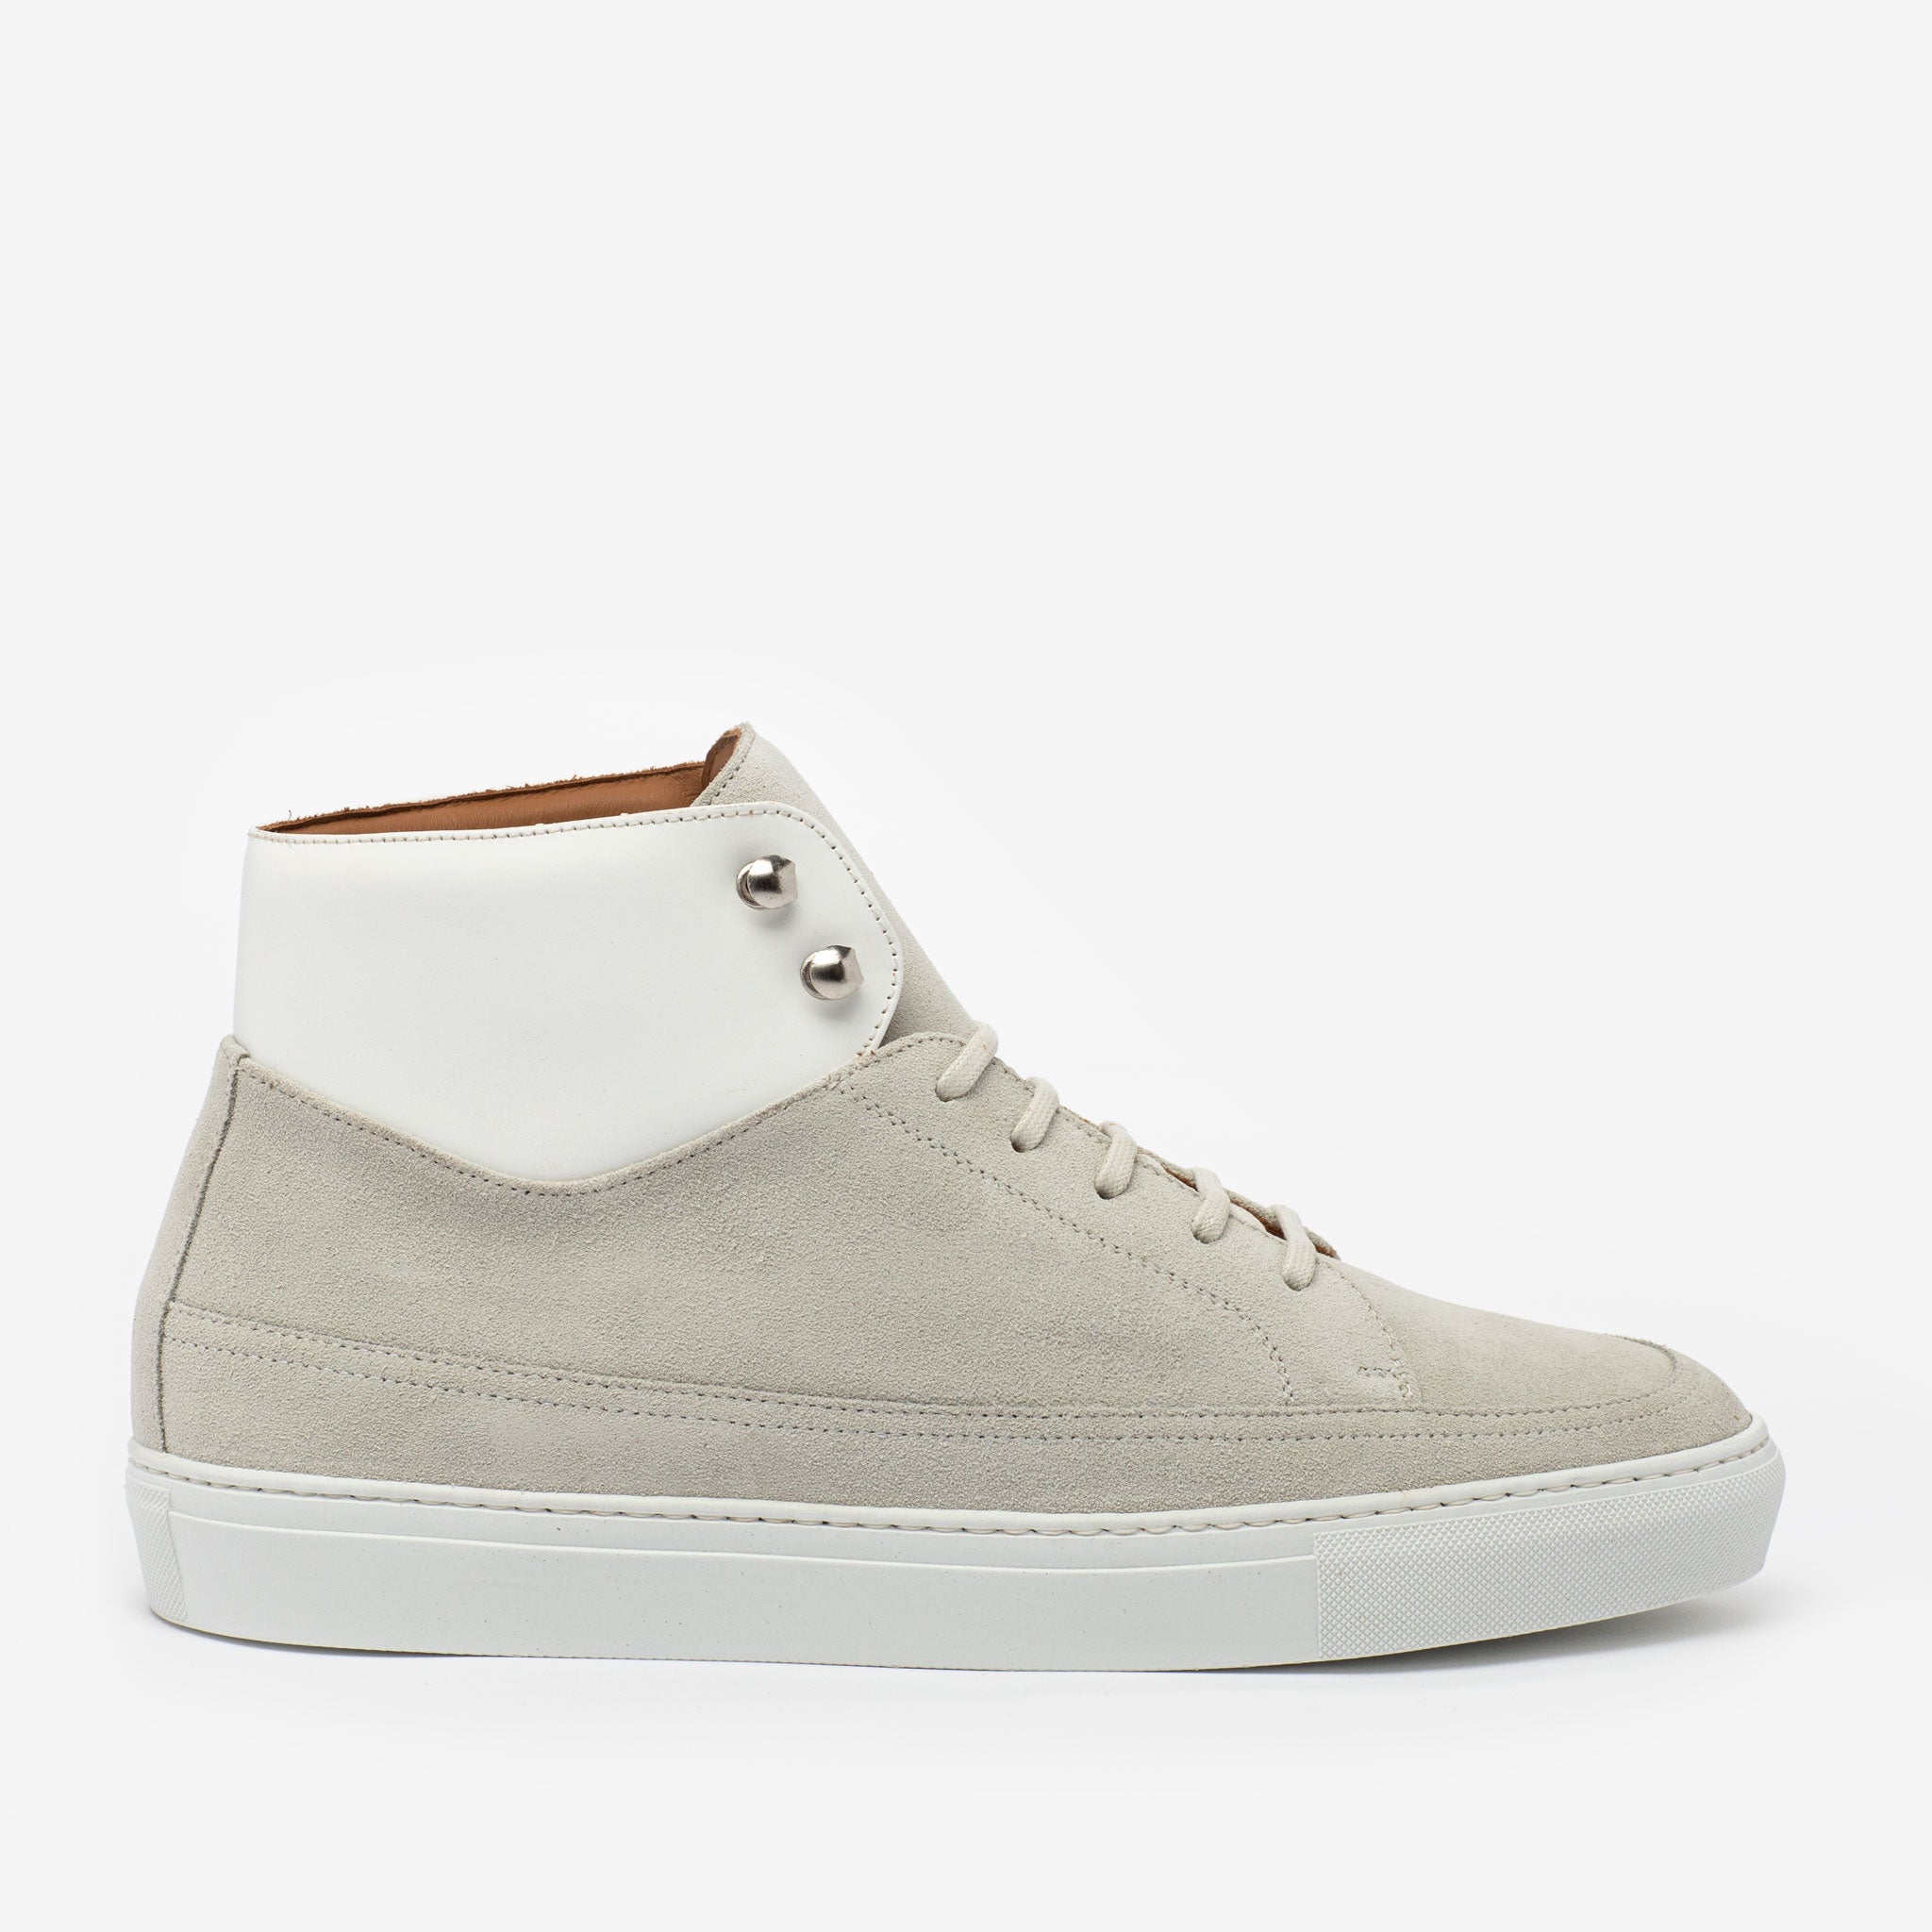 Konsulat Sult min The Fifth Ave Hightop Suede Sneaker in Cream | TAFT